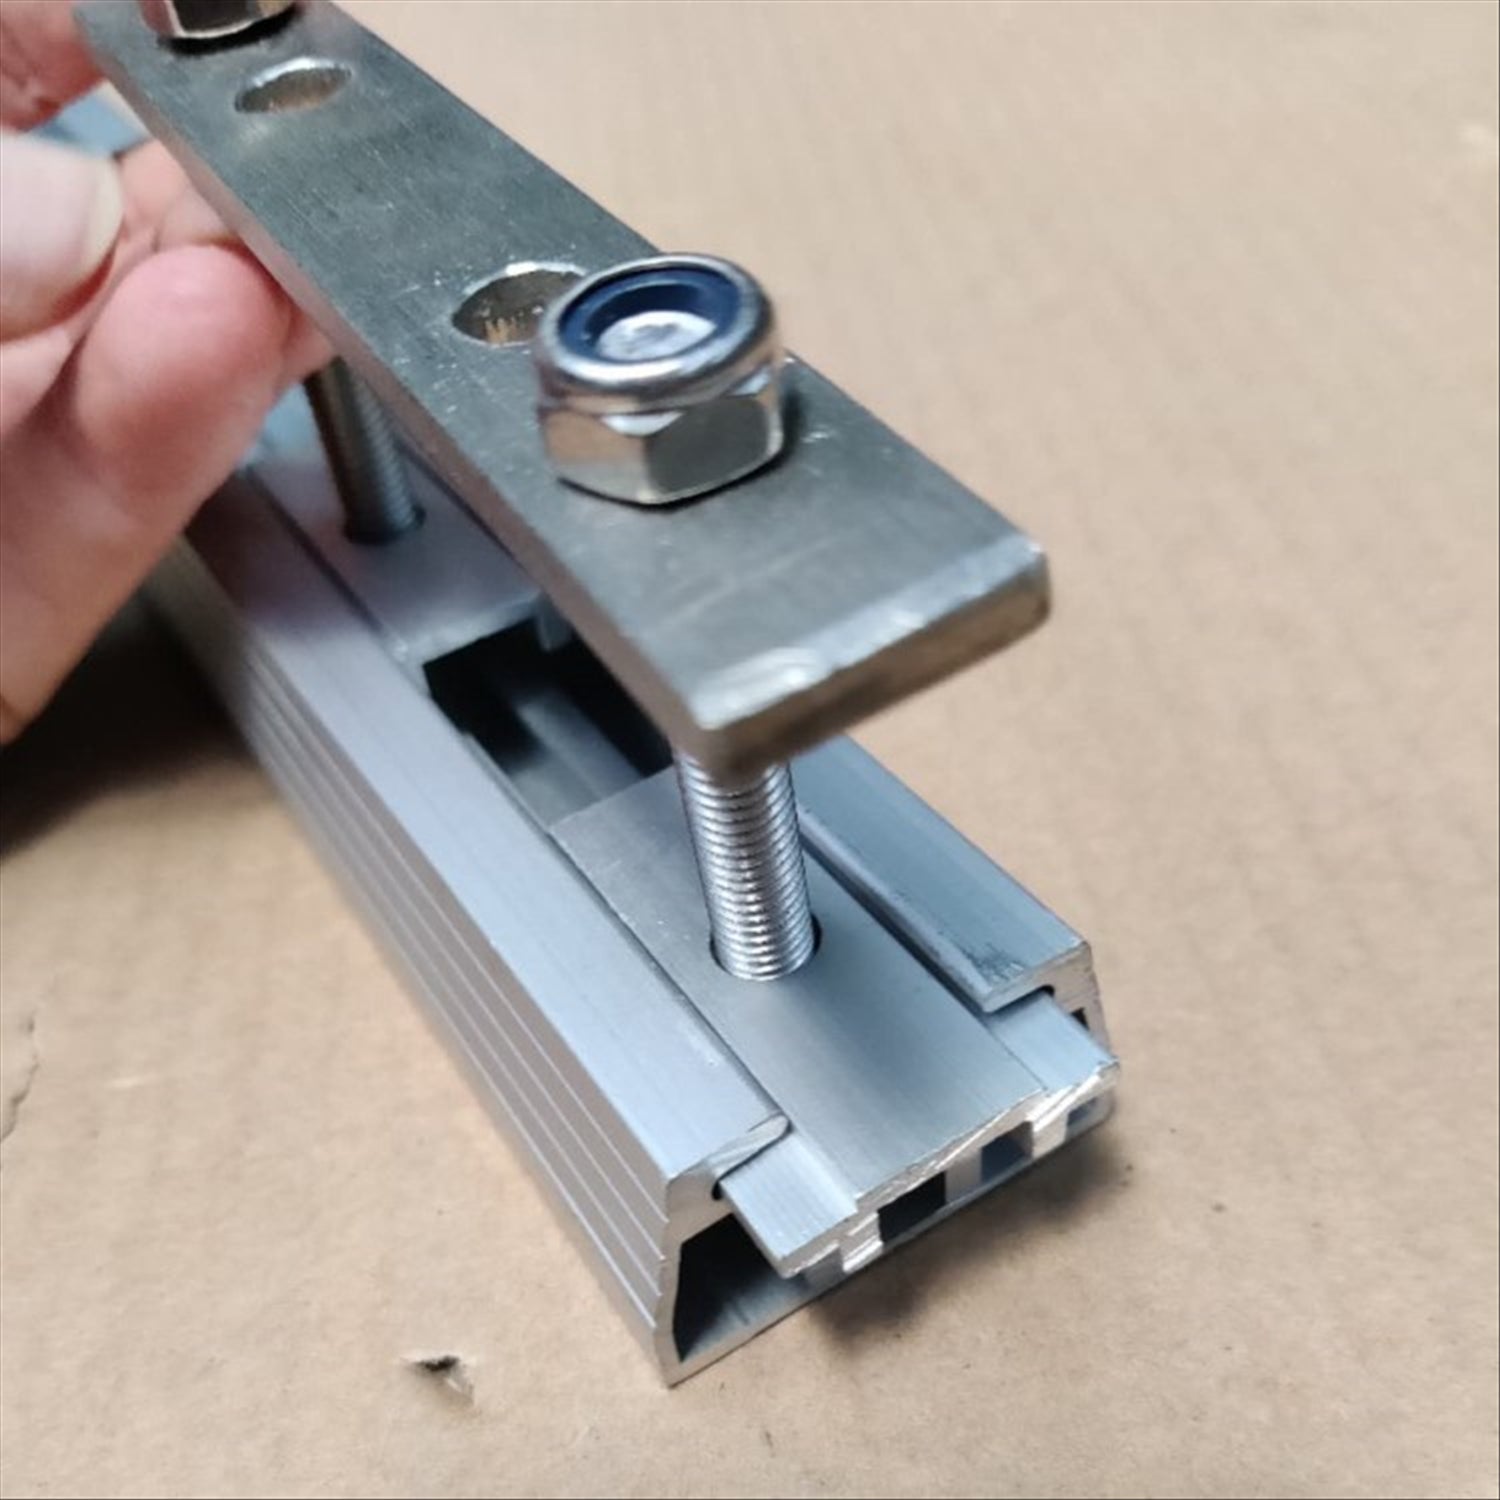 Replacement Roof Top Tent Mounting Rails - Tracks